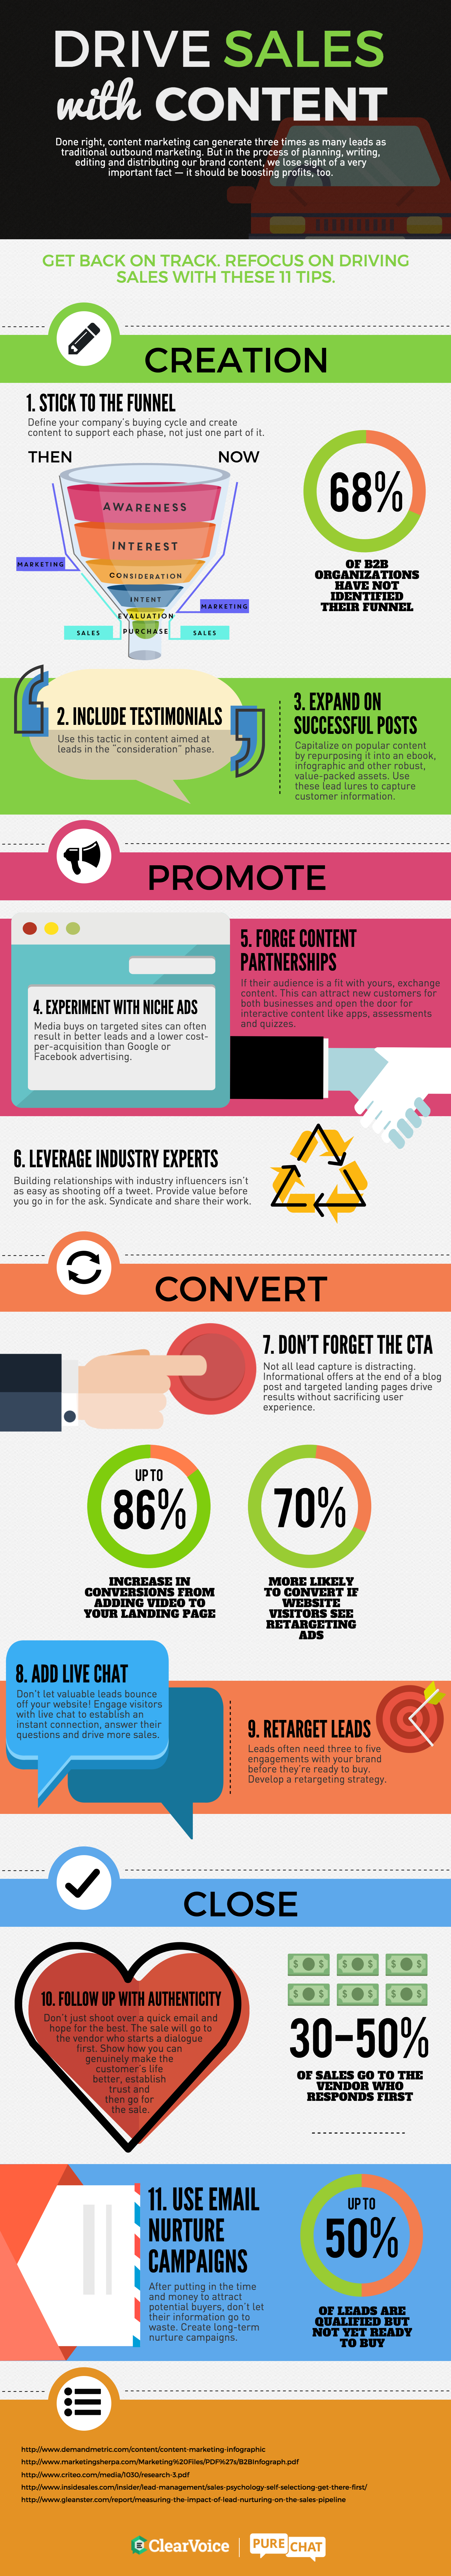 Infographic - Drive Sales With Content